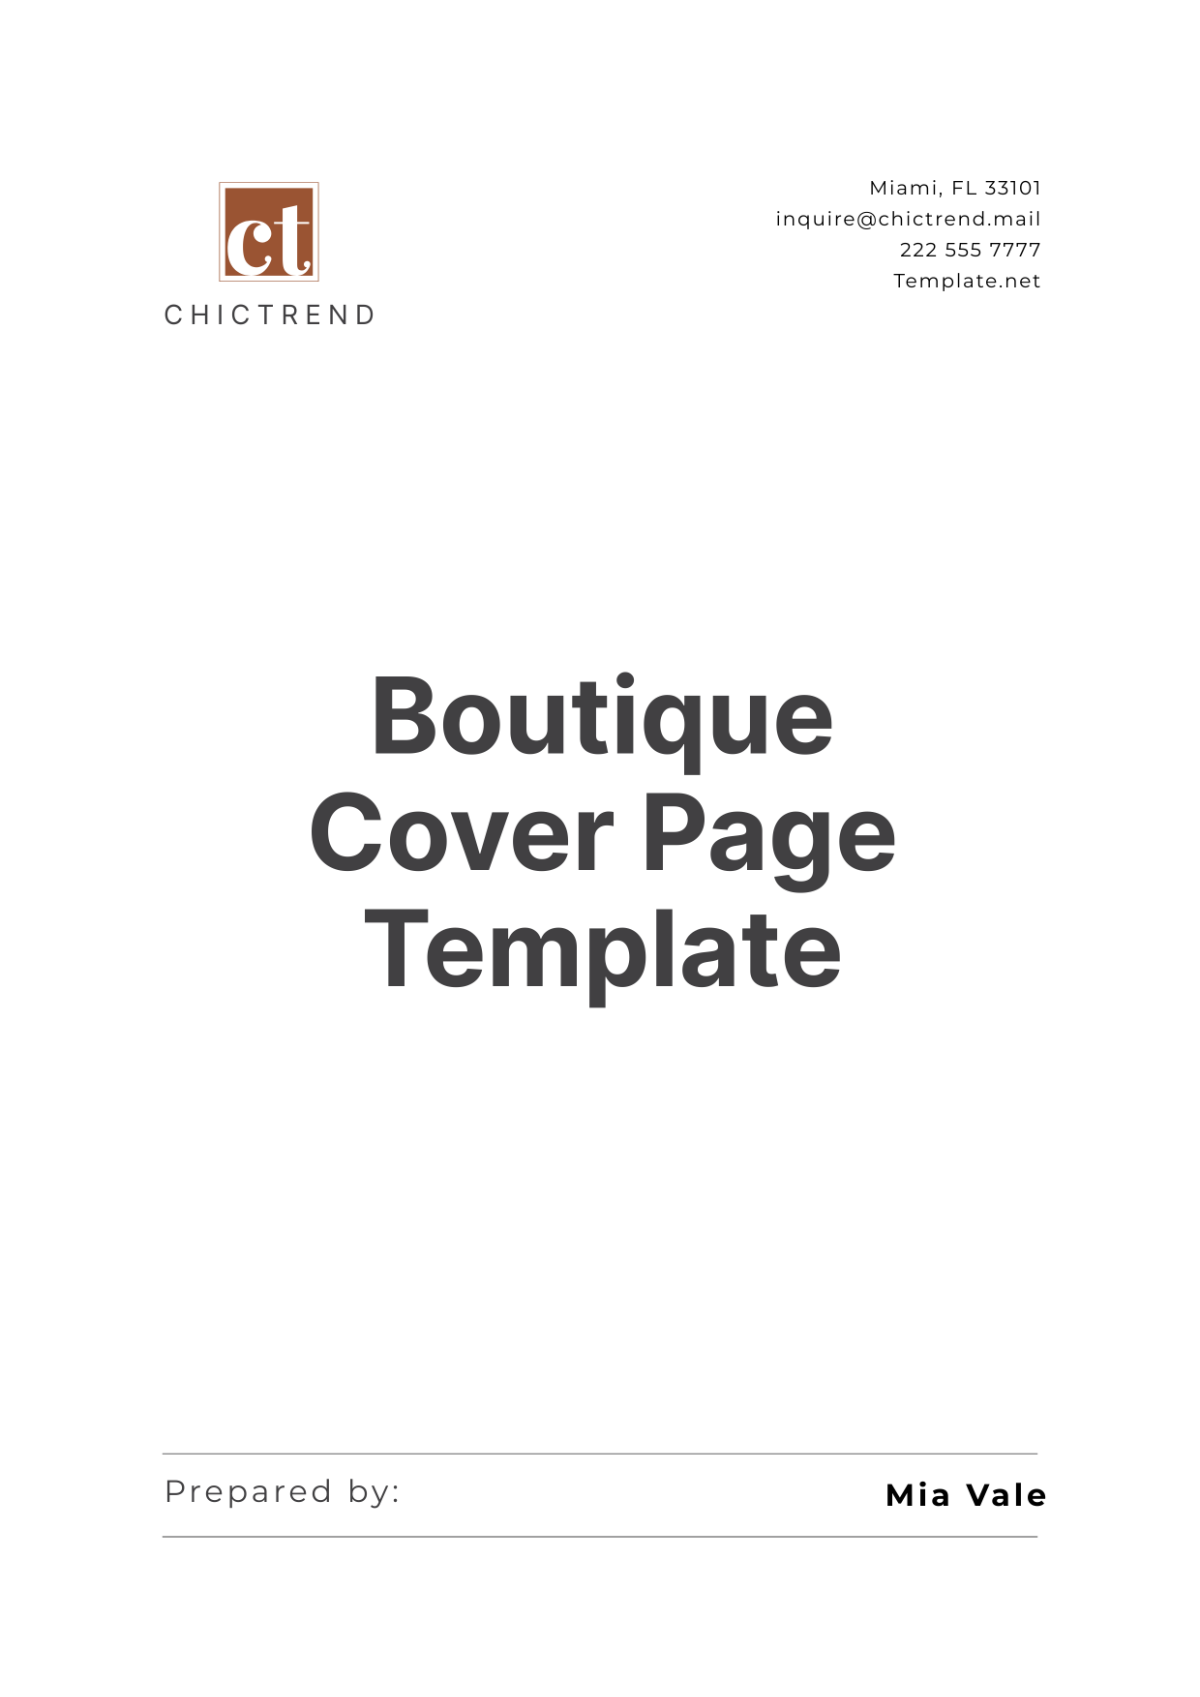 Boutique Cover Page